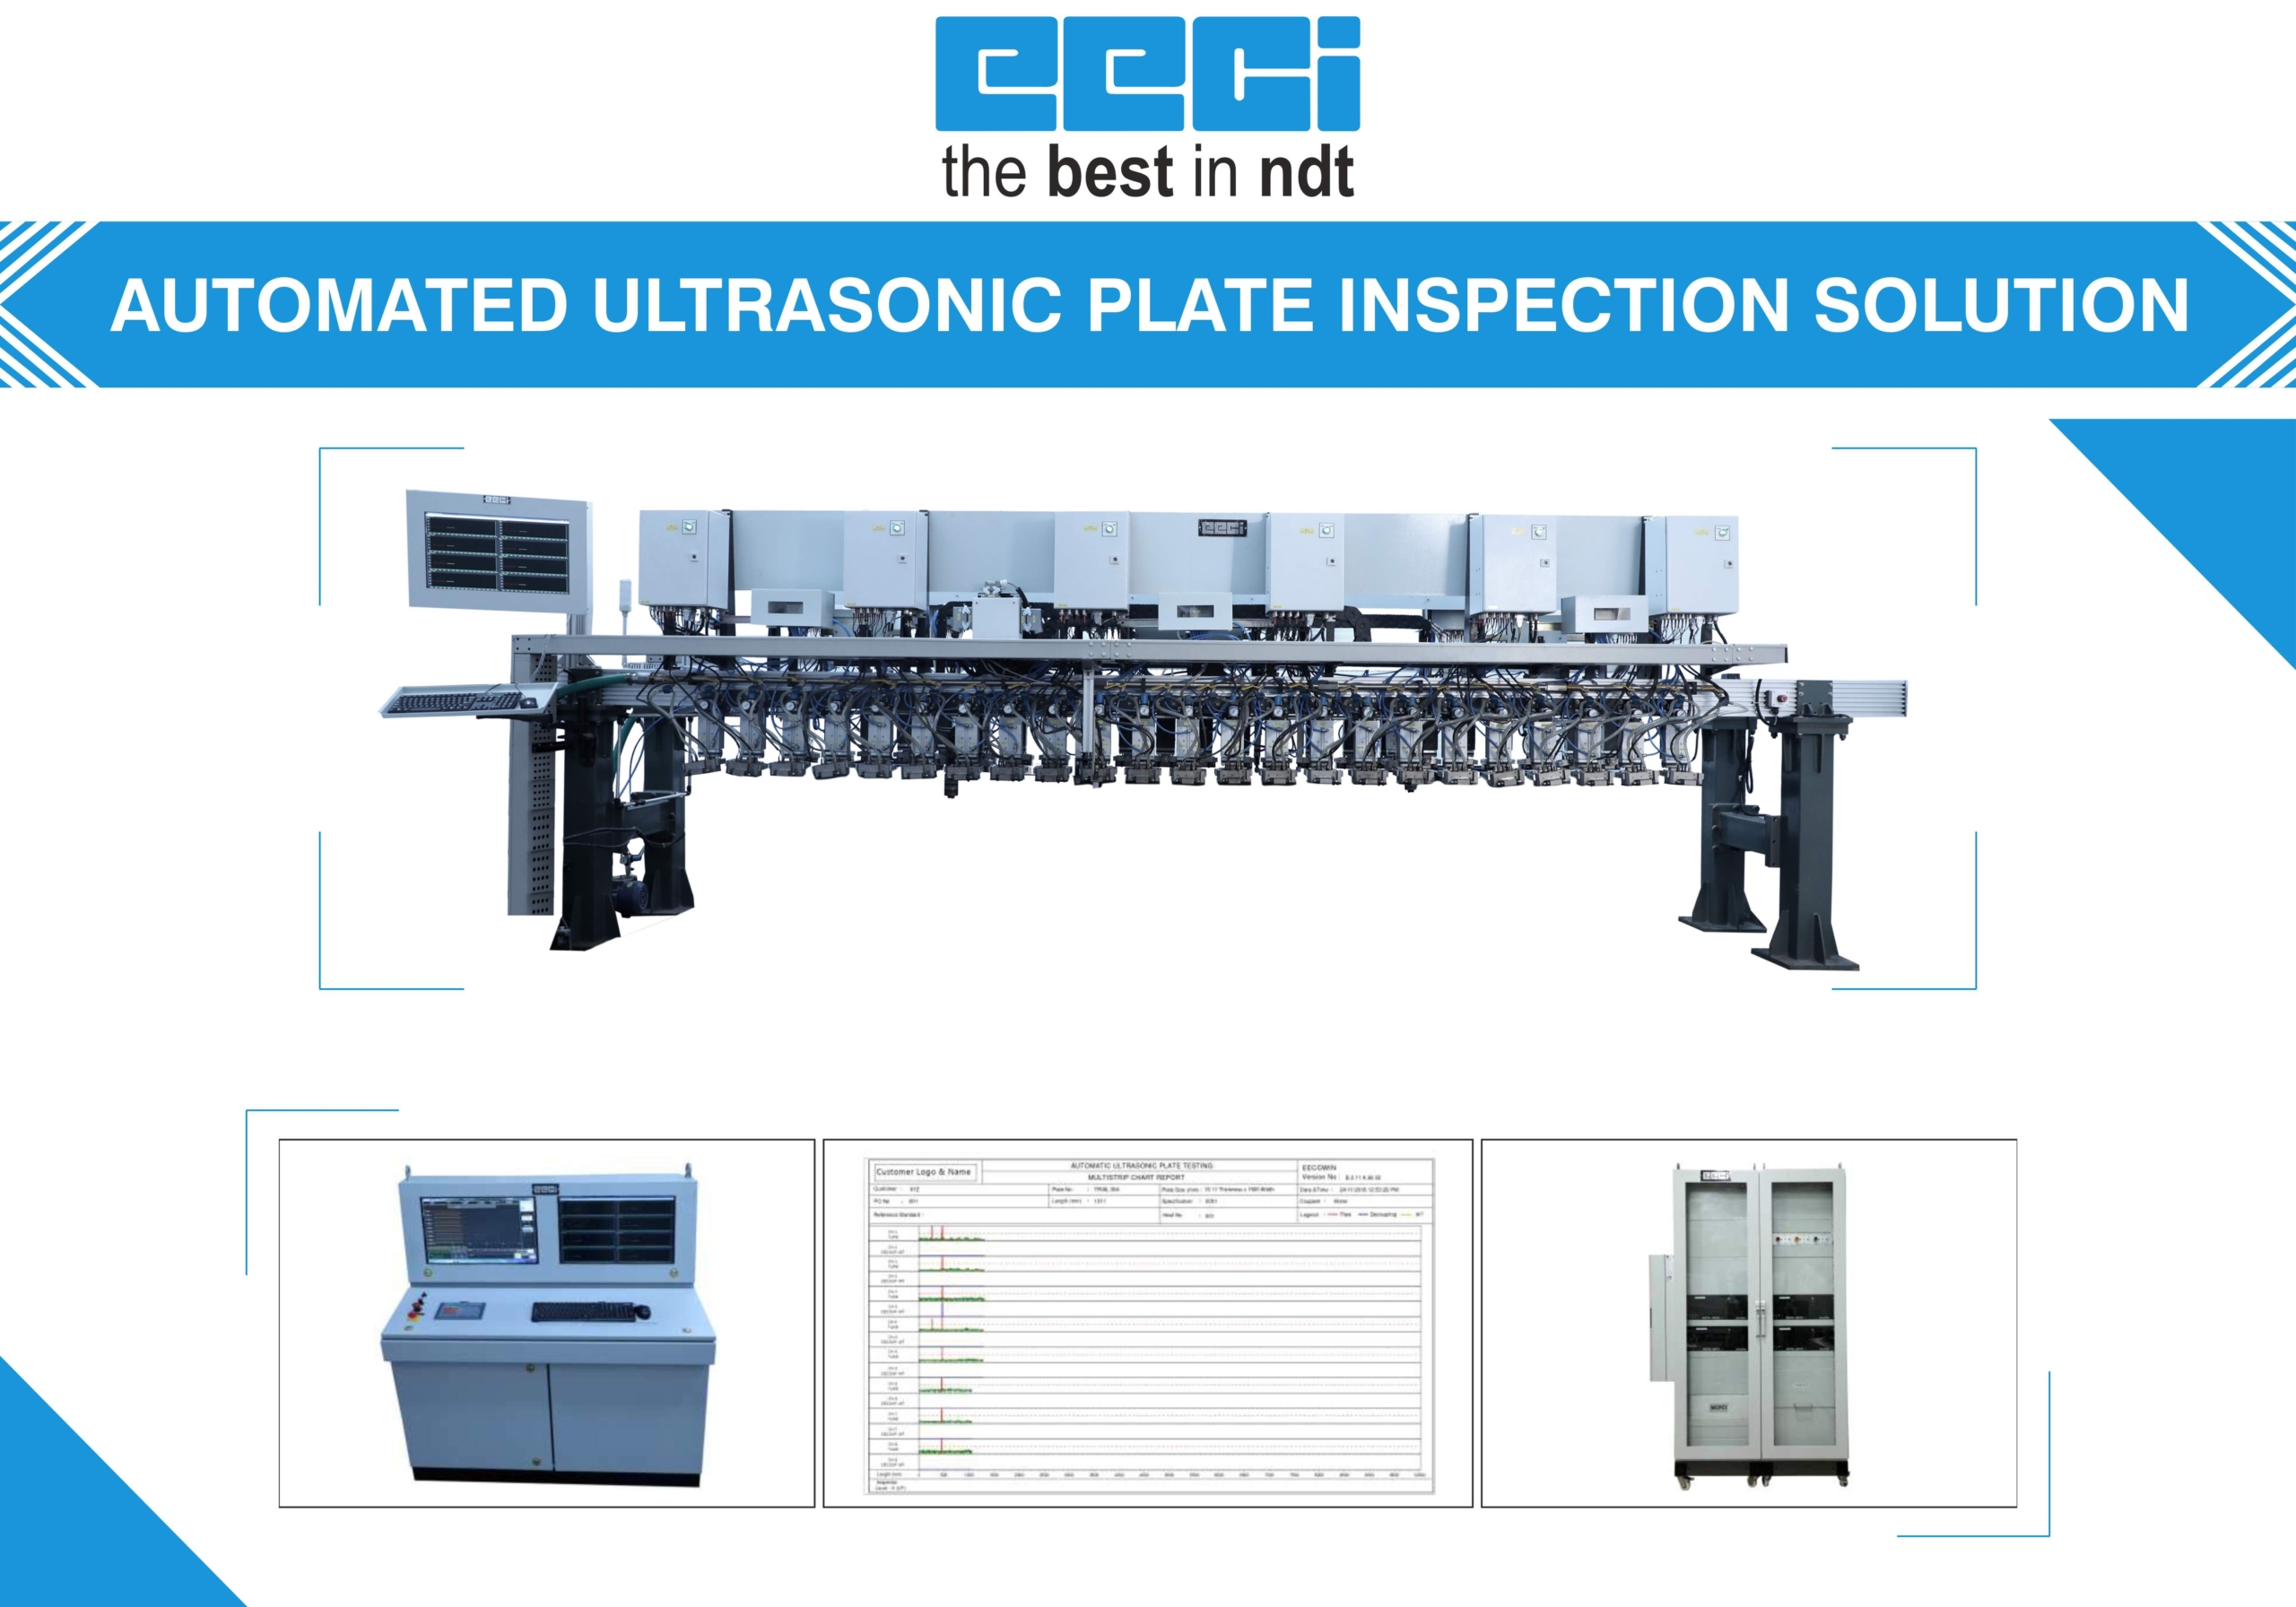 AUTOMATED ULTRASONIC PLATE INSPECTION SOLUTION